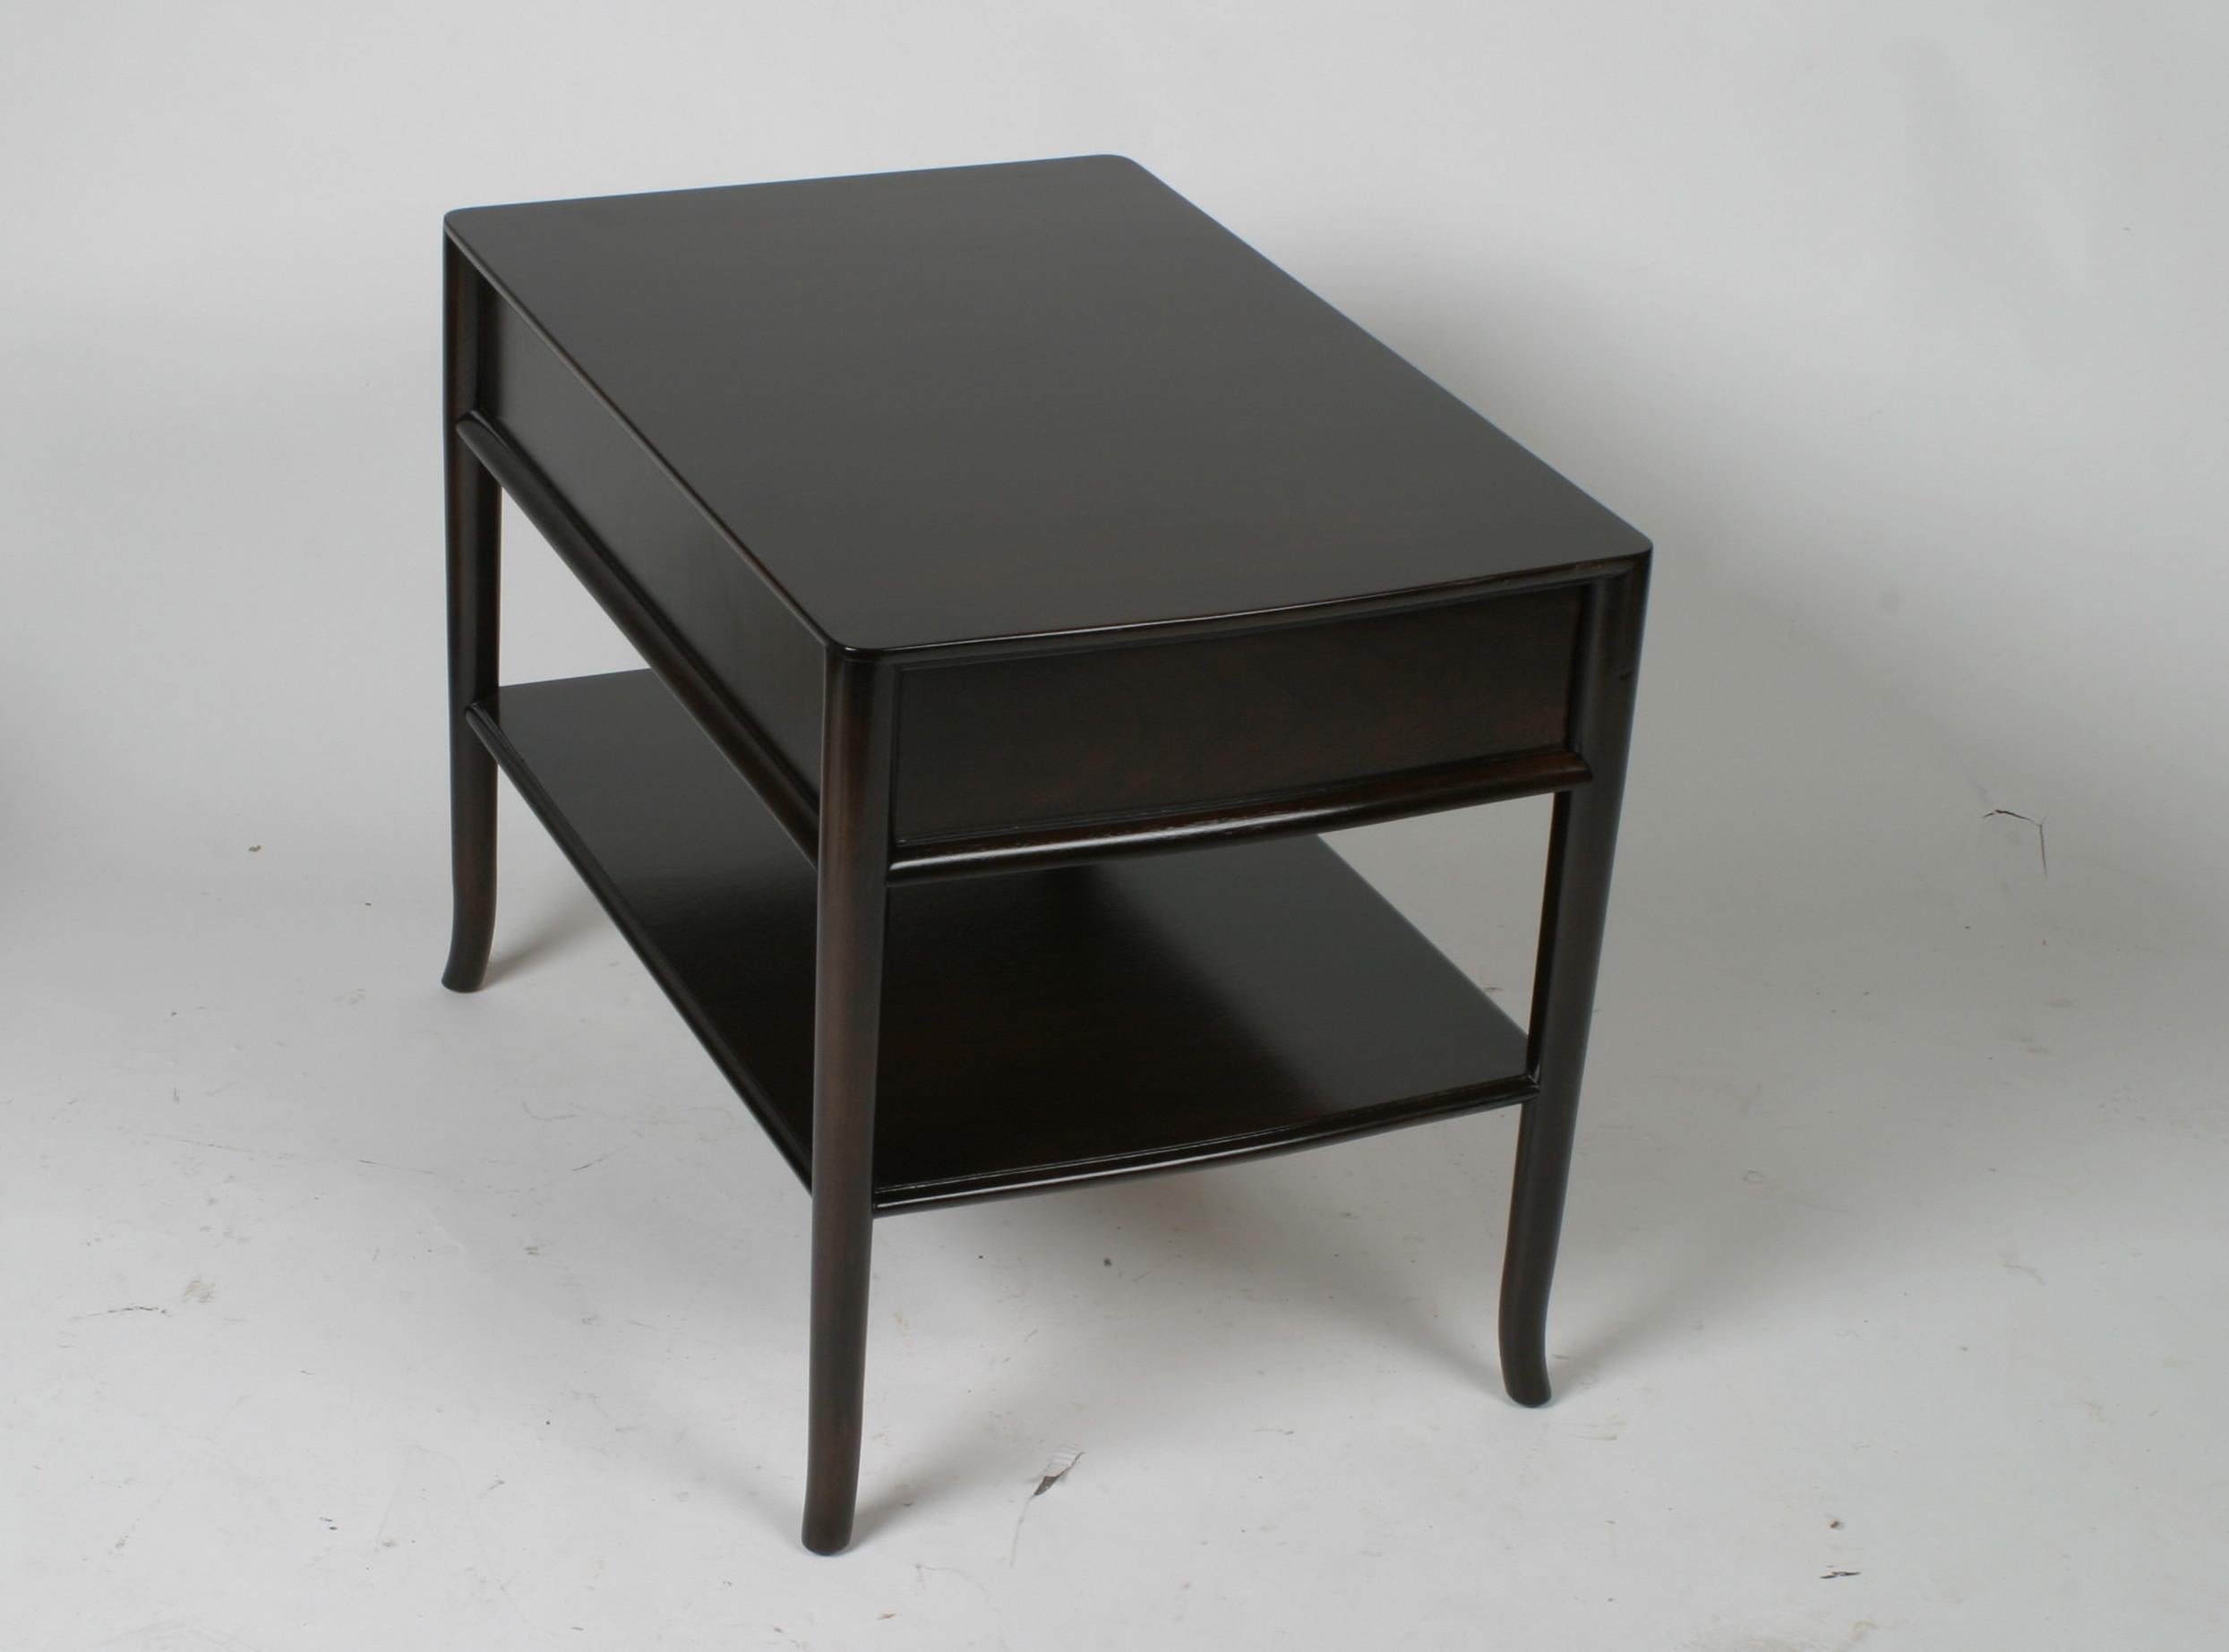 Elegant matching pair of T. H. Robsjohn-Gibbings for Widdicomb nightstands with serpentine curved fronts, drawer, lower shelf, and having elegant tapered legs that curve outward at the bottom. Dark brown finish on walnut, Label, dated 1957. To be